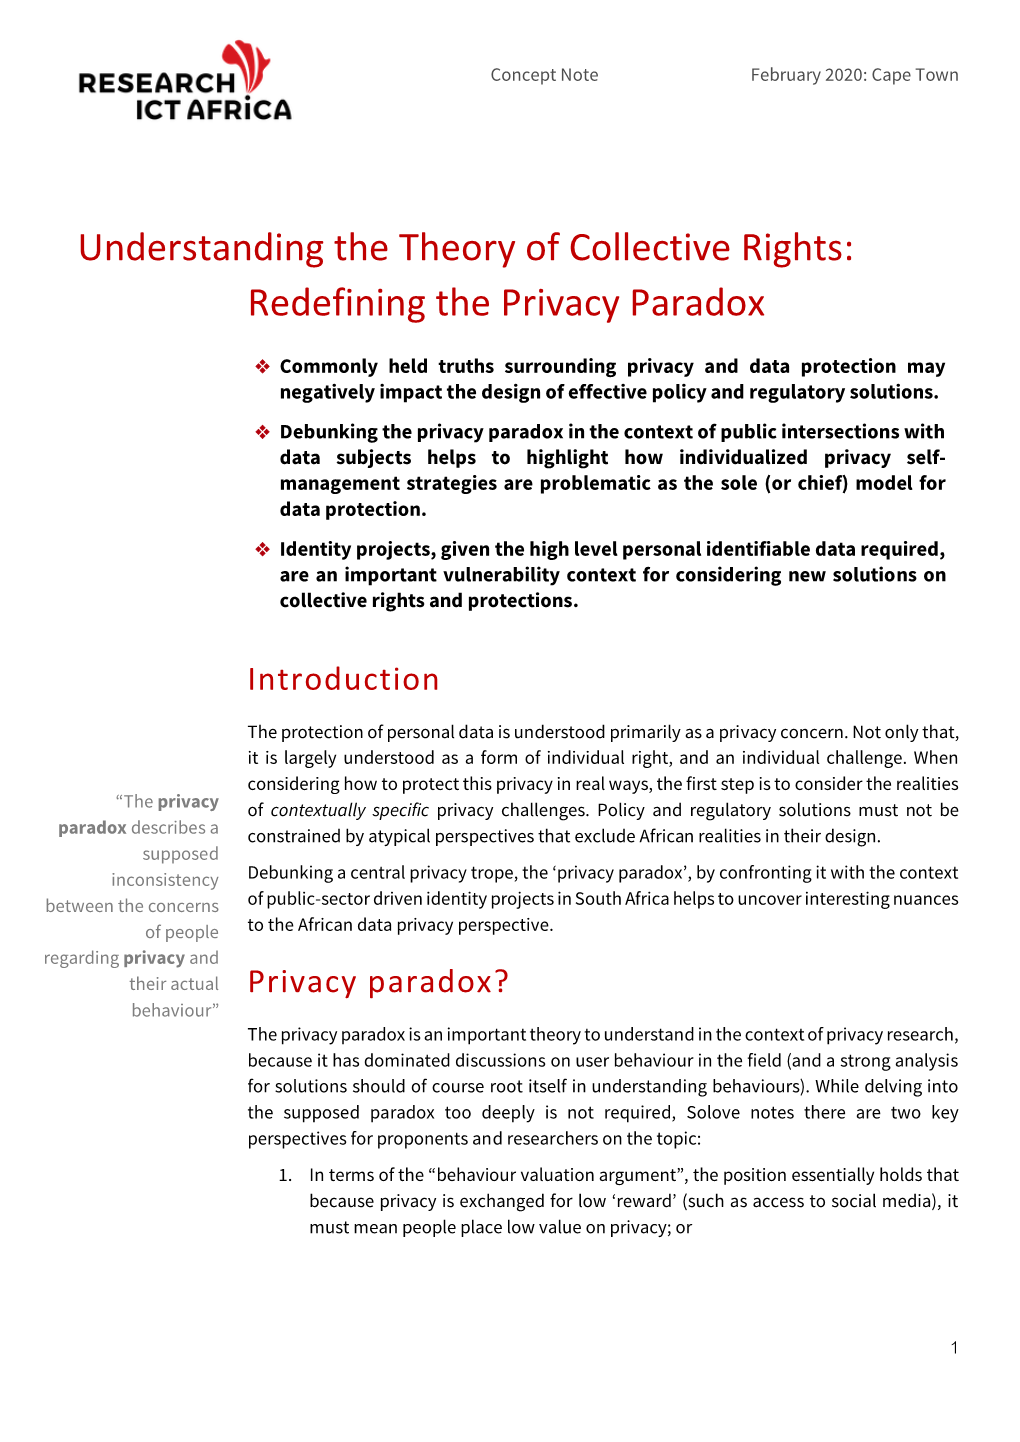 Understanding the Theory of Collective Rights: Redefining the Privacy Paradox